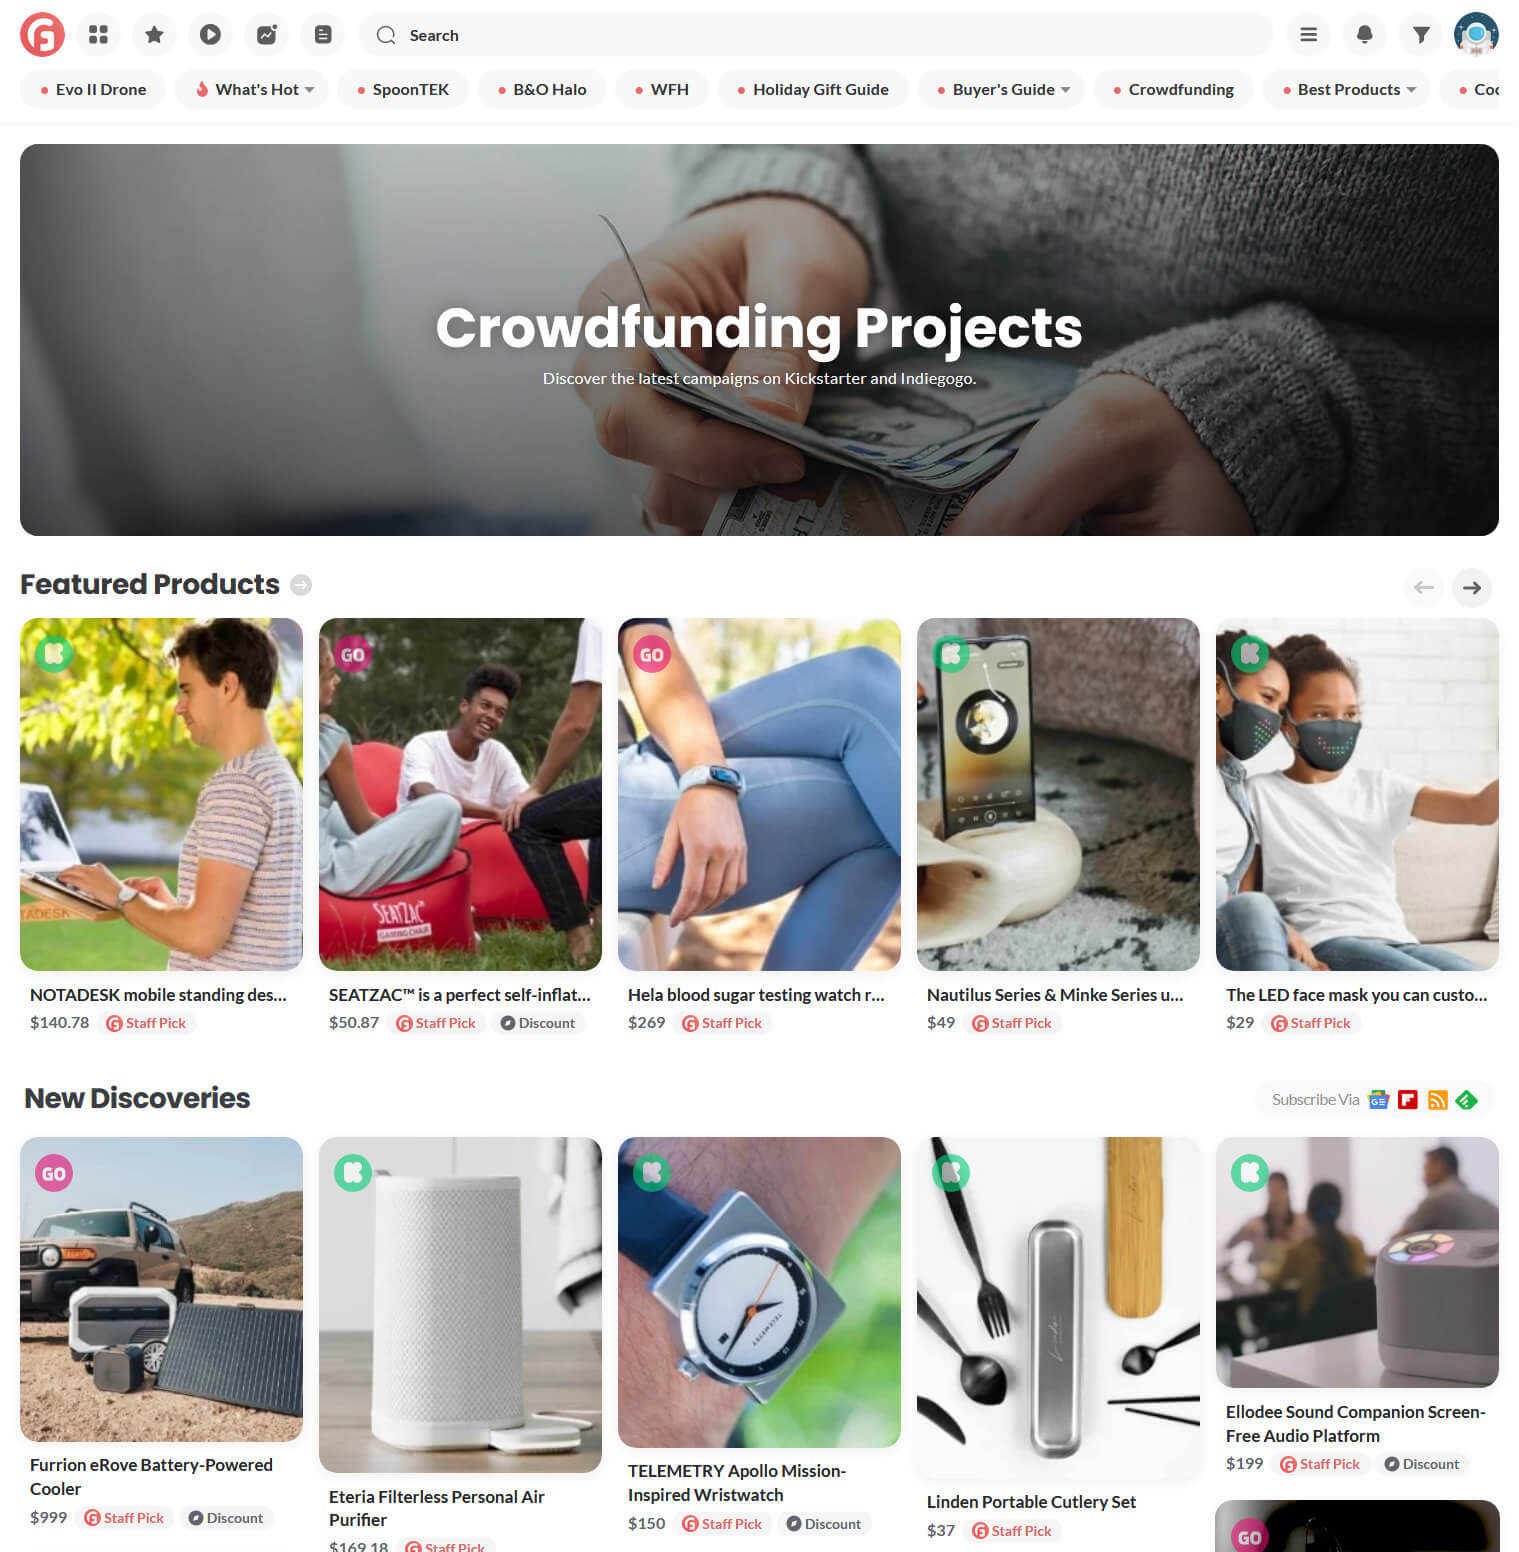 Crowdfunding Projects